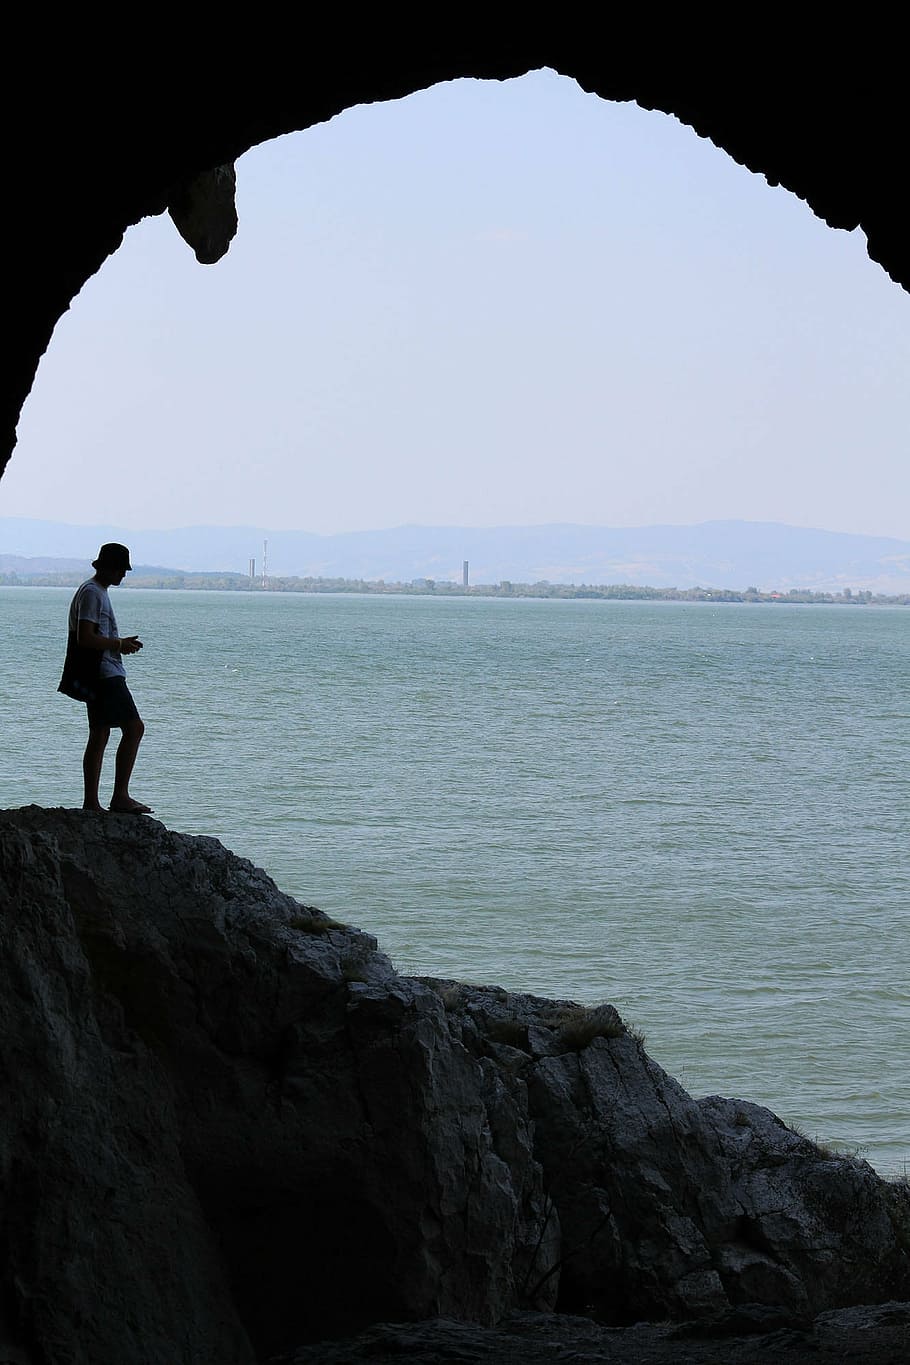 cave, photographer, lake, man, person, silhouette, horizon, real people, sea, one person